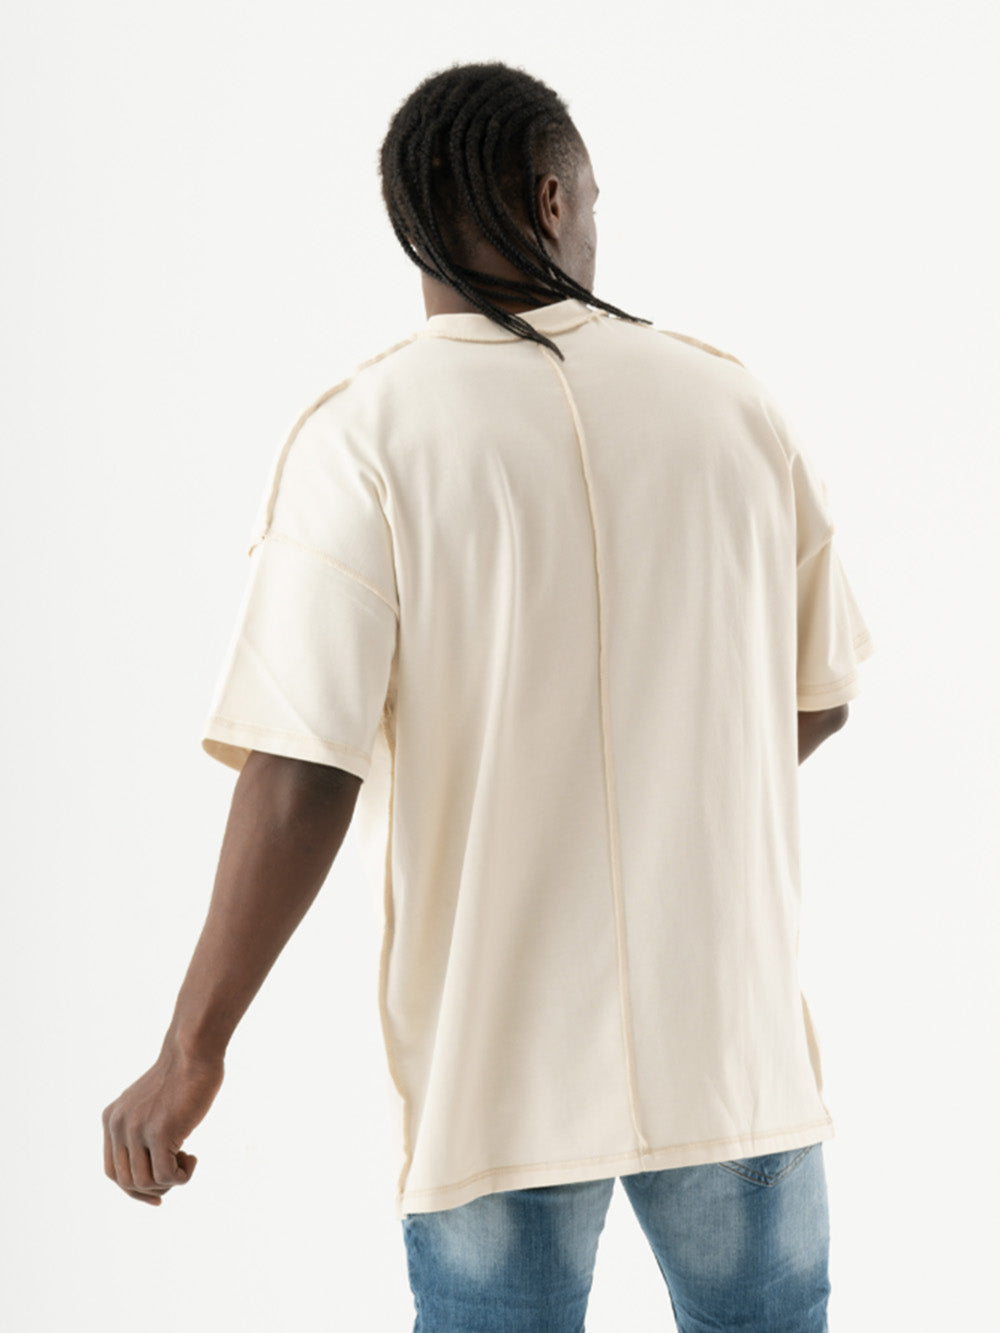 The back of a man wearing a MENTALIST T-SHIRT | BEIGE.